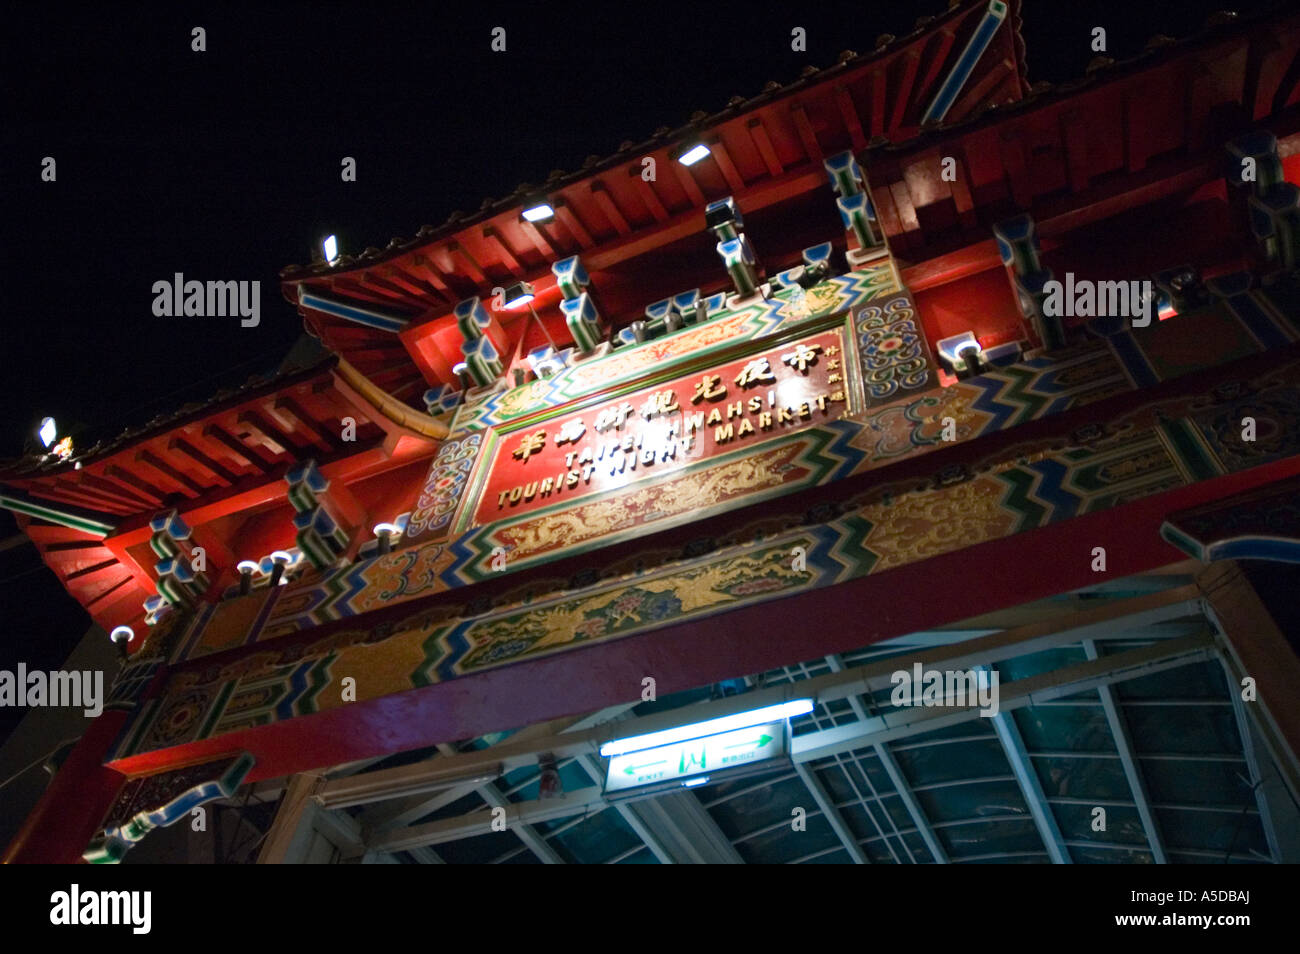 Stock photo of the sign on the entrance to the Snake Alley Night Market in Taipei Taiwan Stock Photo